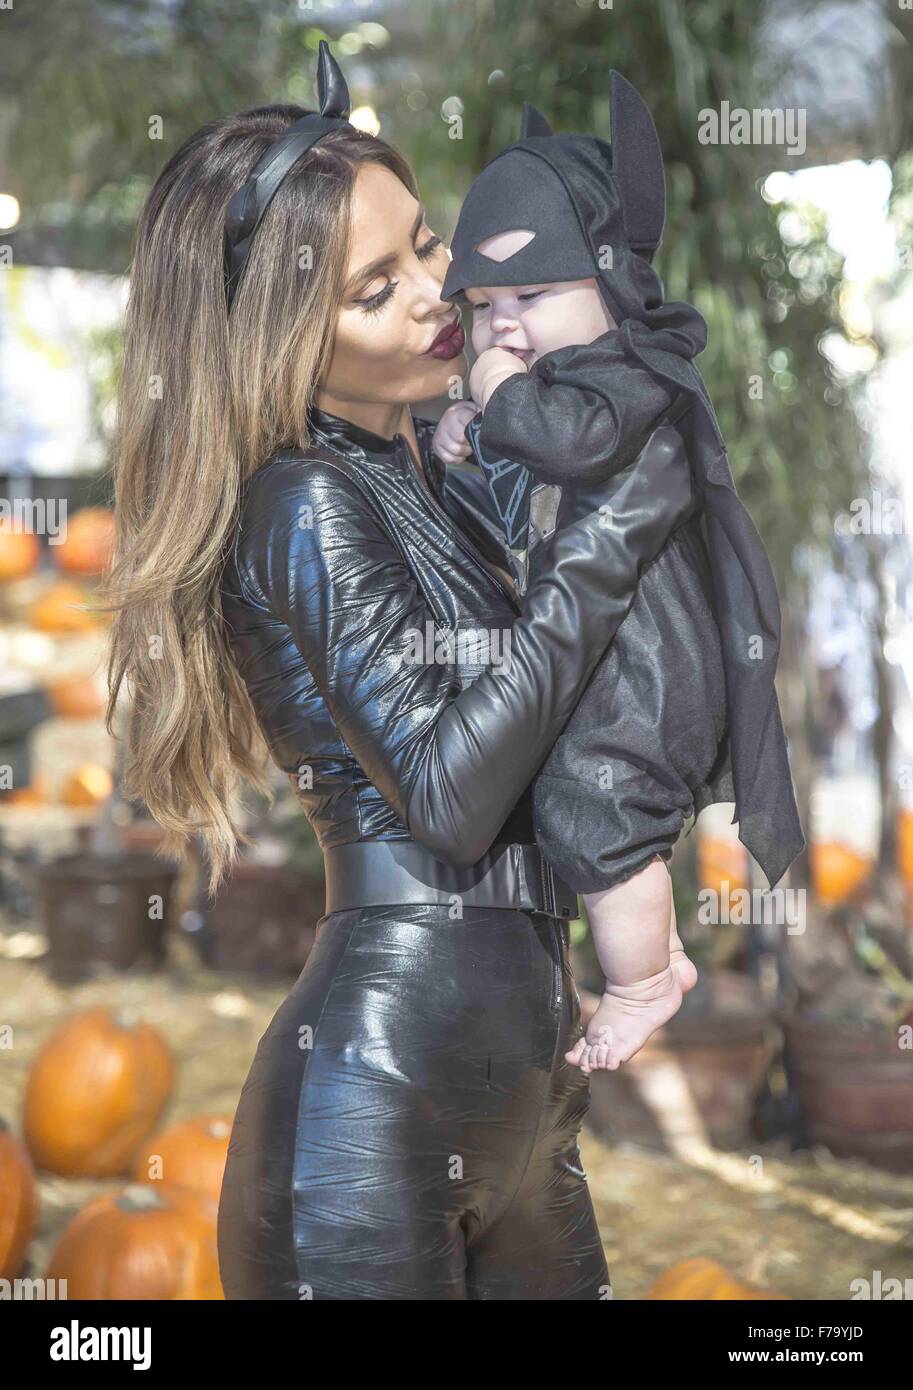 Sarah Stage poses during a Halloween themed photoshoot with her baby boy,  James, at the Toluca Lake Pumpkin Festival & Petting Zoo. The lingerie  model and her son were dressed as Catwoman